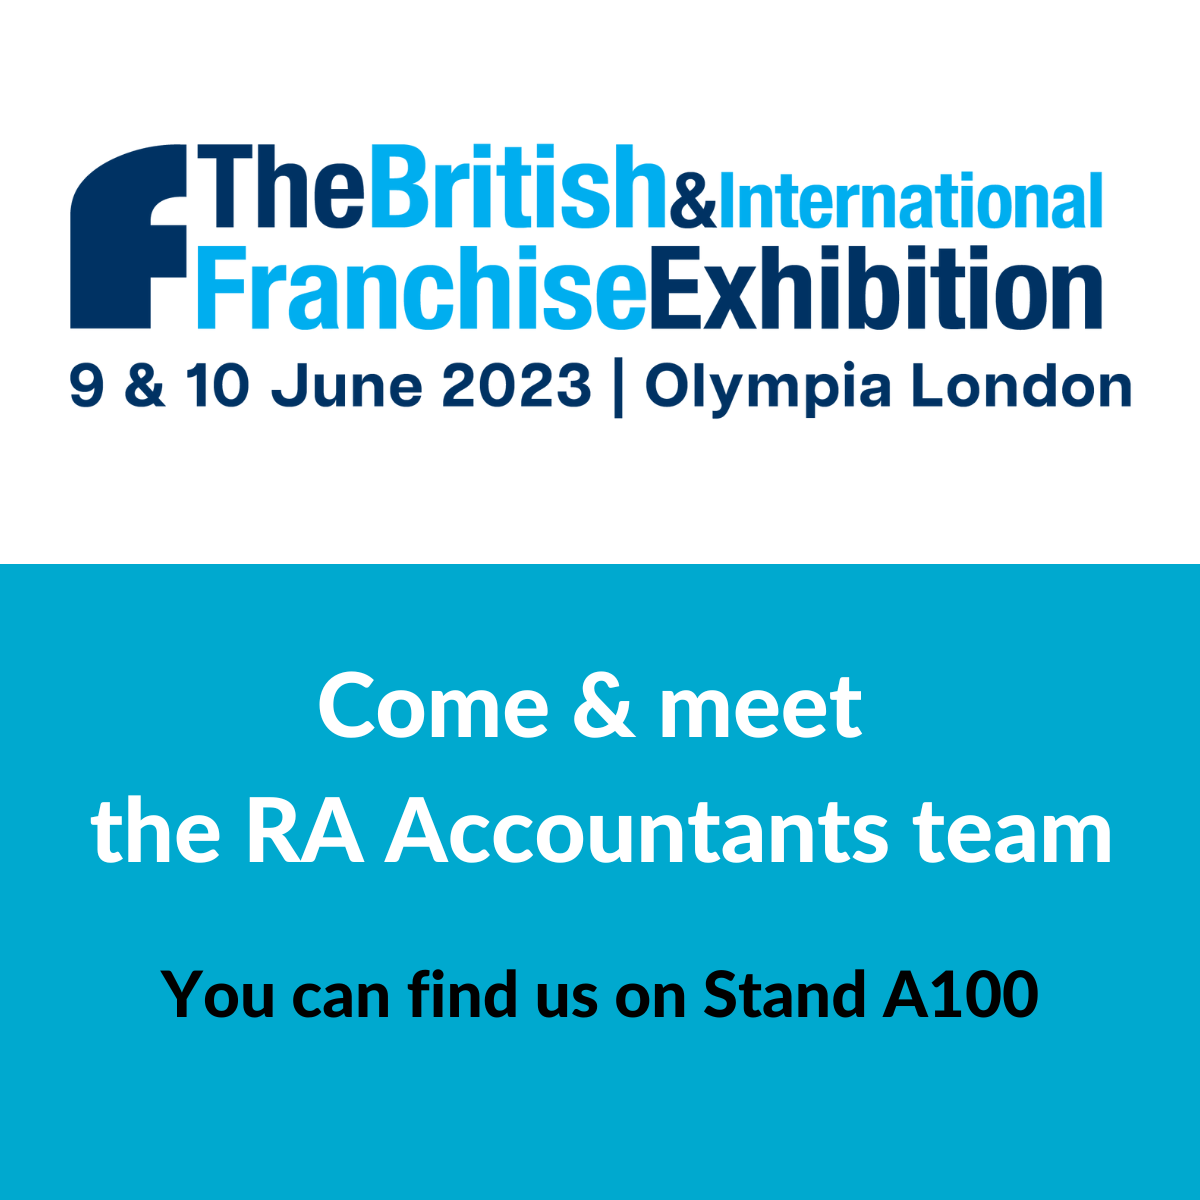 British & International Franchise Exhibition - Come and meet the RA Accountants Team on Stand A100